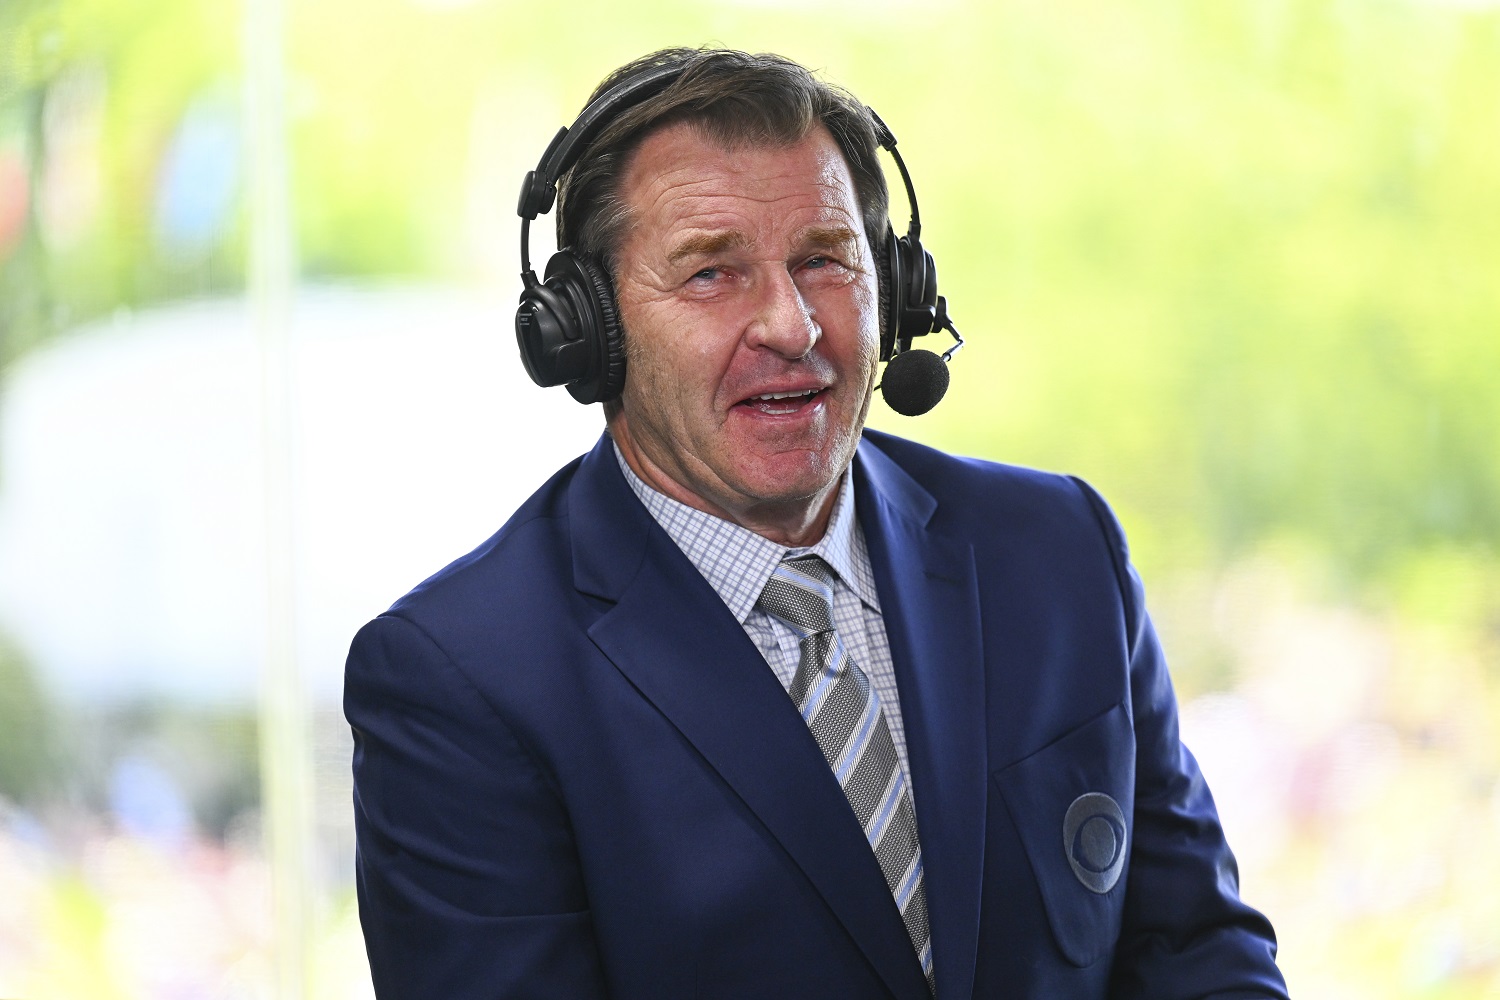 Nick Faldo of CBS Sports in the 18th hole booth during the third round of the Memorial Tournament at Muirfield Village Golf Club on June 4, 2022 in Dublin, Ohio.